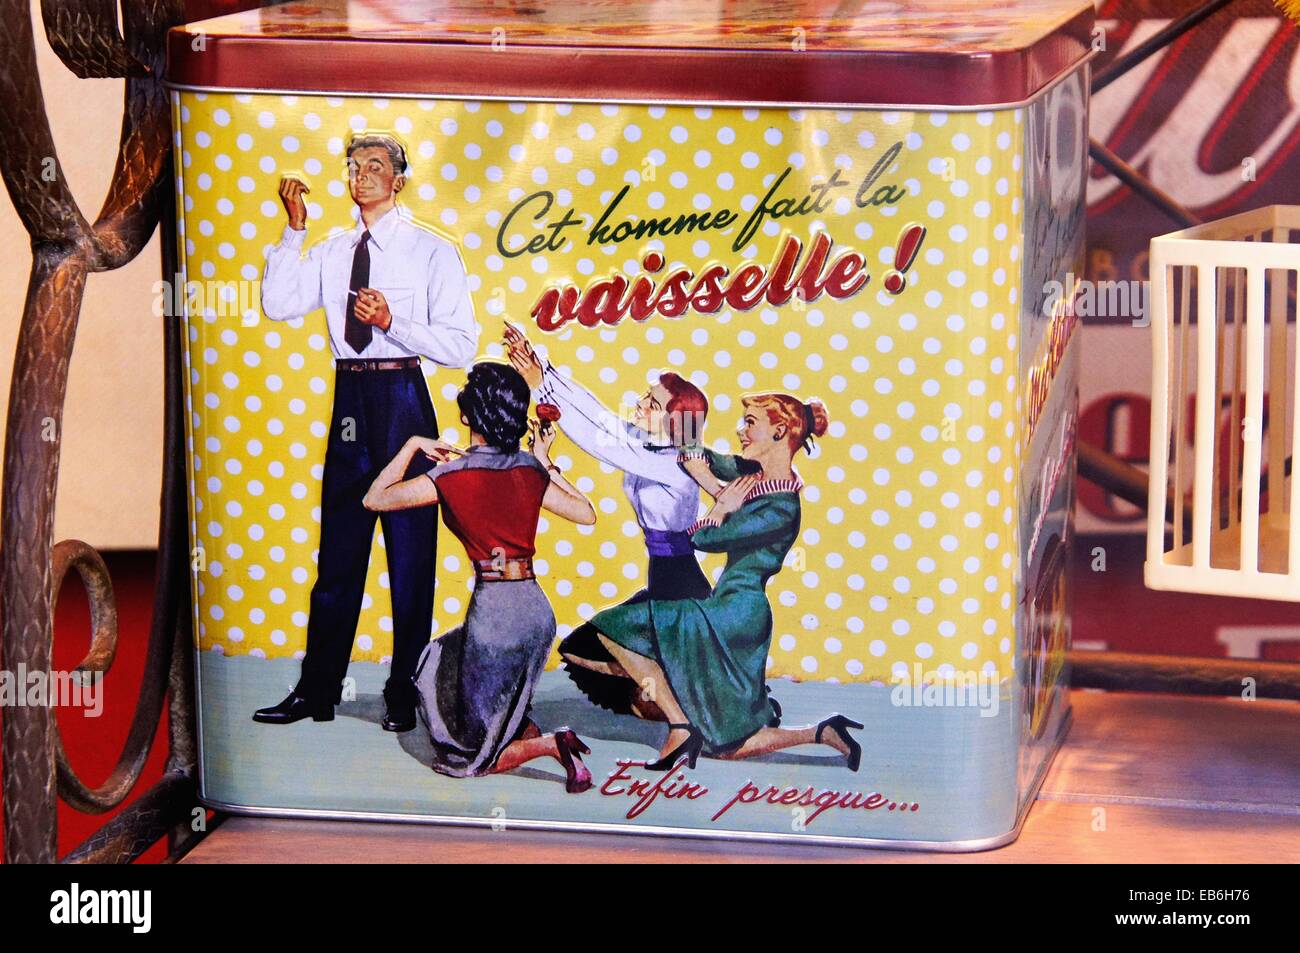 ´Cet homme fait la vaisselle!´  (This man does the washing-up!.), kitchen box from 1950´s, France Stock Photo